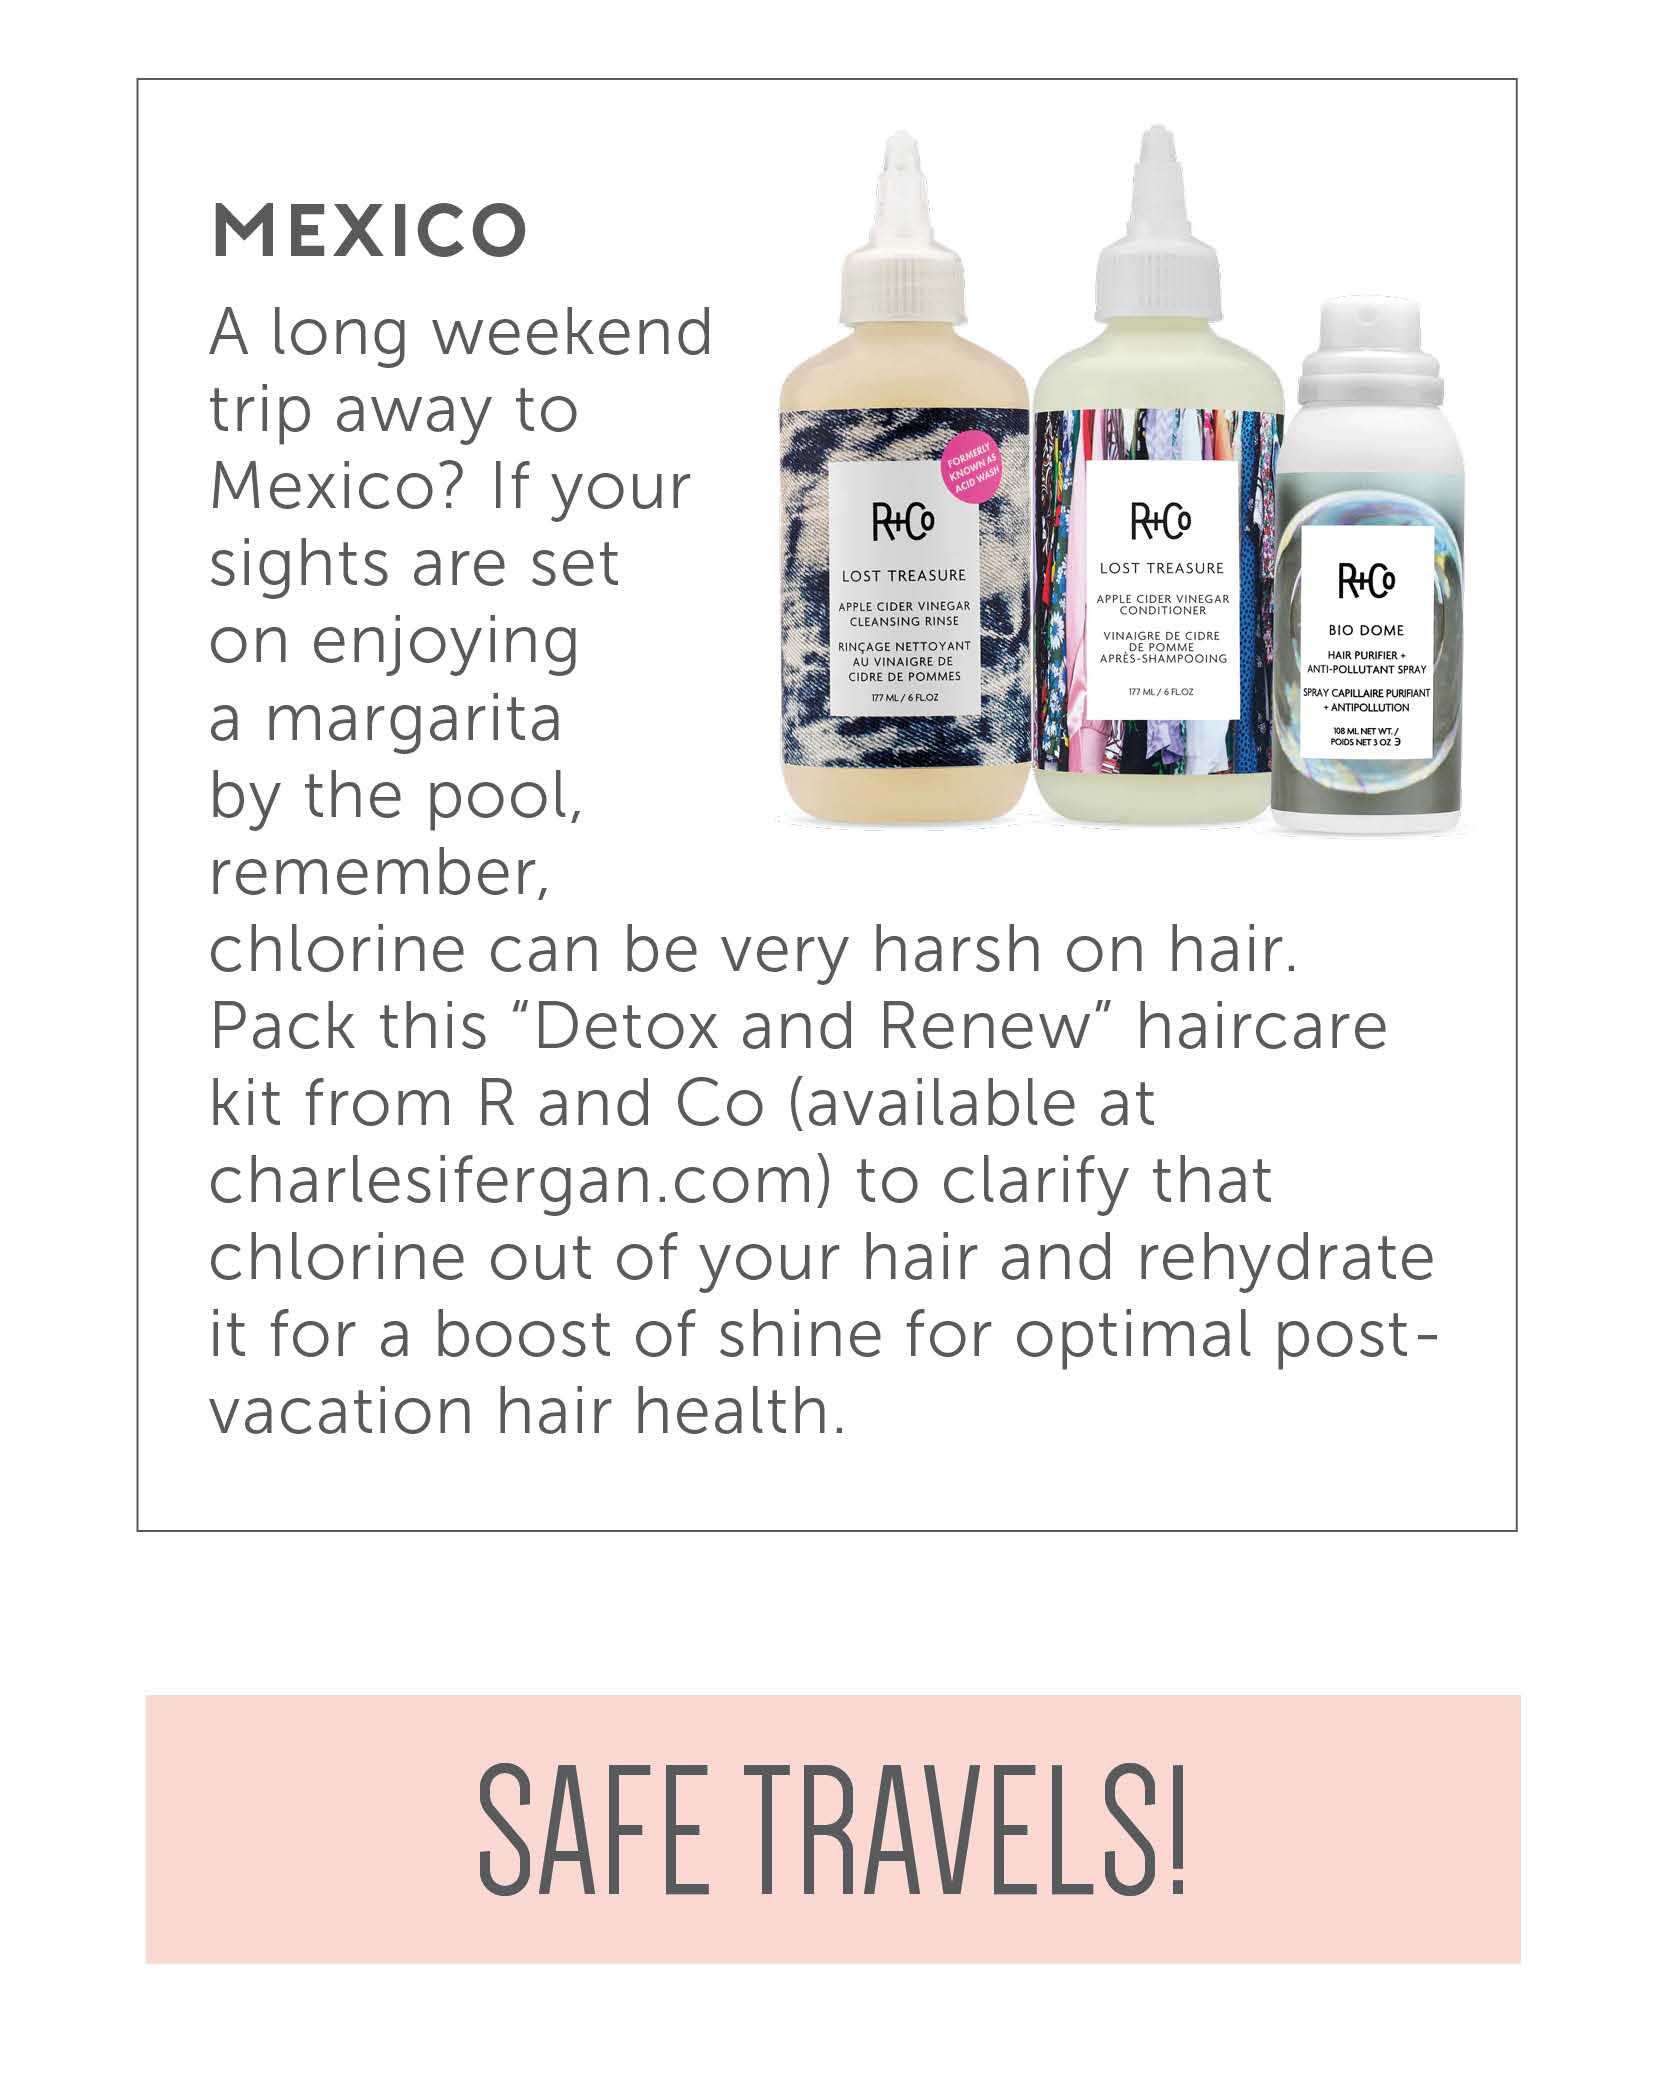 Mexico - A long weekend trip away to Mexico? If your sights are set on enjoying a margarita by the pool, remember, chlorine can be very harsh on hair. Pack this "Detox and Renew" haircare kit from R and Co (available at charlesifergan.com) to clarify that chlorine out of your hair and rehydrate it for a boost of shine for optimal post-vacation hair health. Safe travels!!